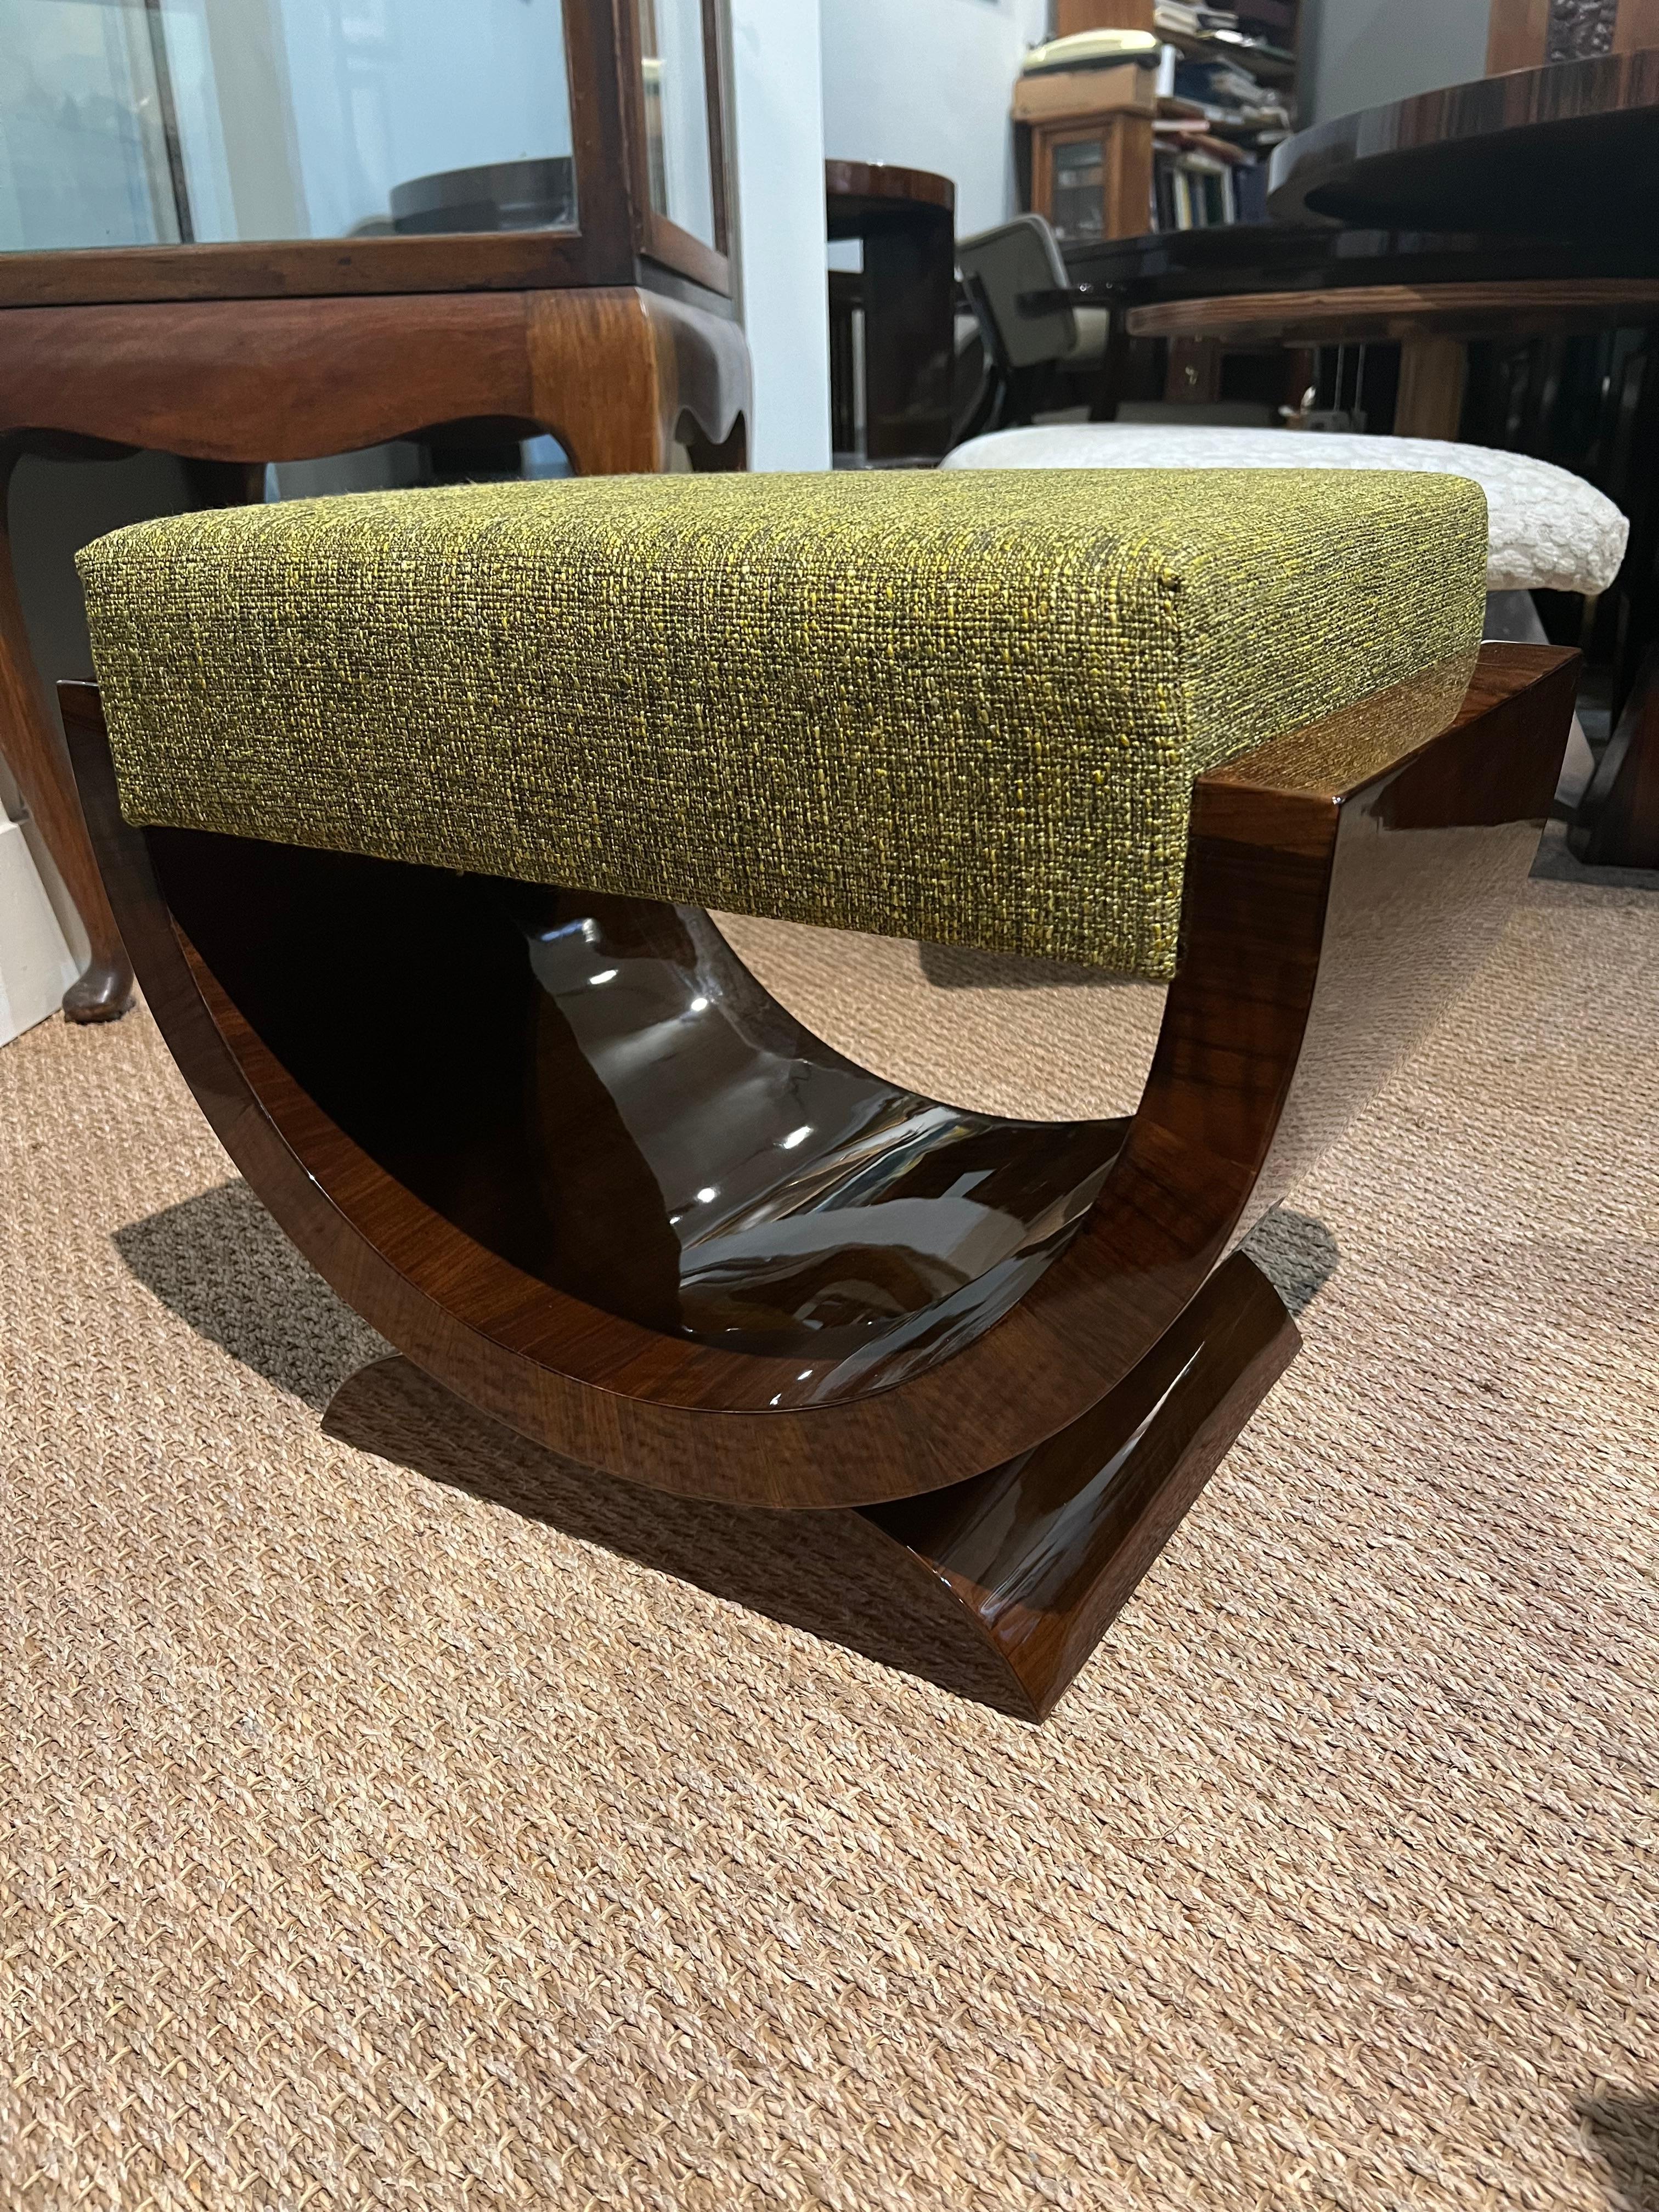 Beautiful Art Deco ottoman from France made out of high quality walnut wood. Comfortable sit is supported by the semi-circular leg that is attached to the trapezoid stable base. Ottoman is newly re-upholstered  with light green fabric and